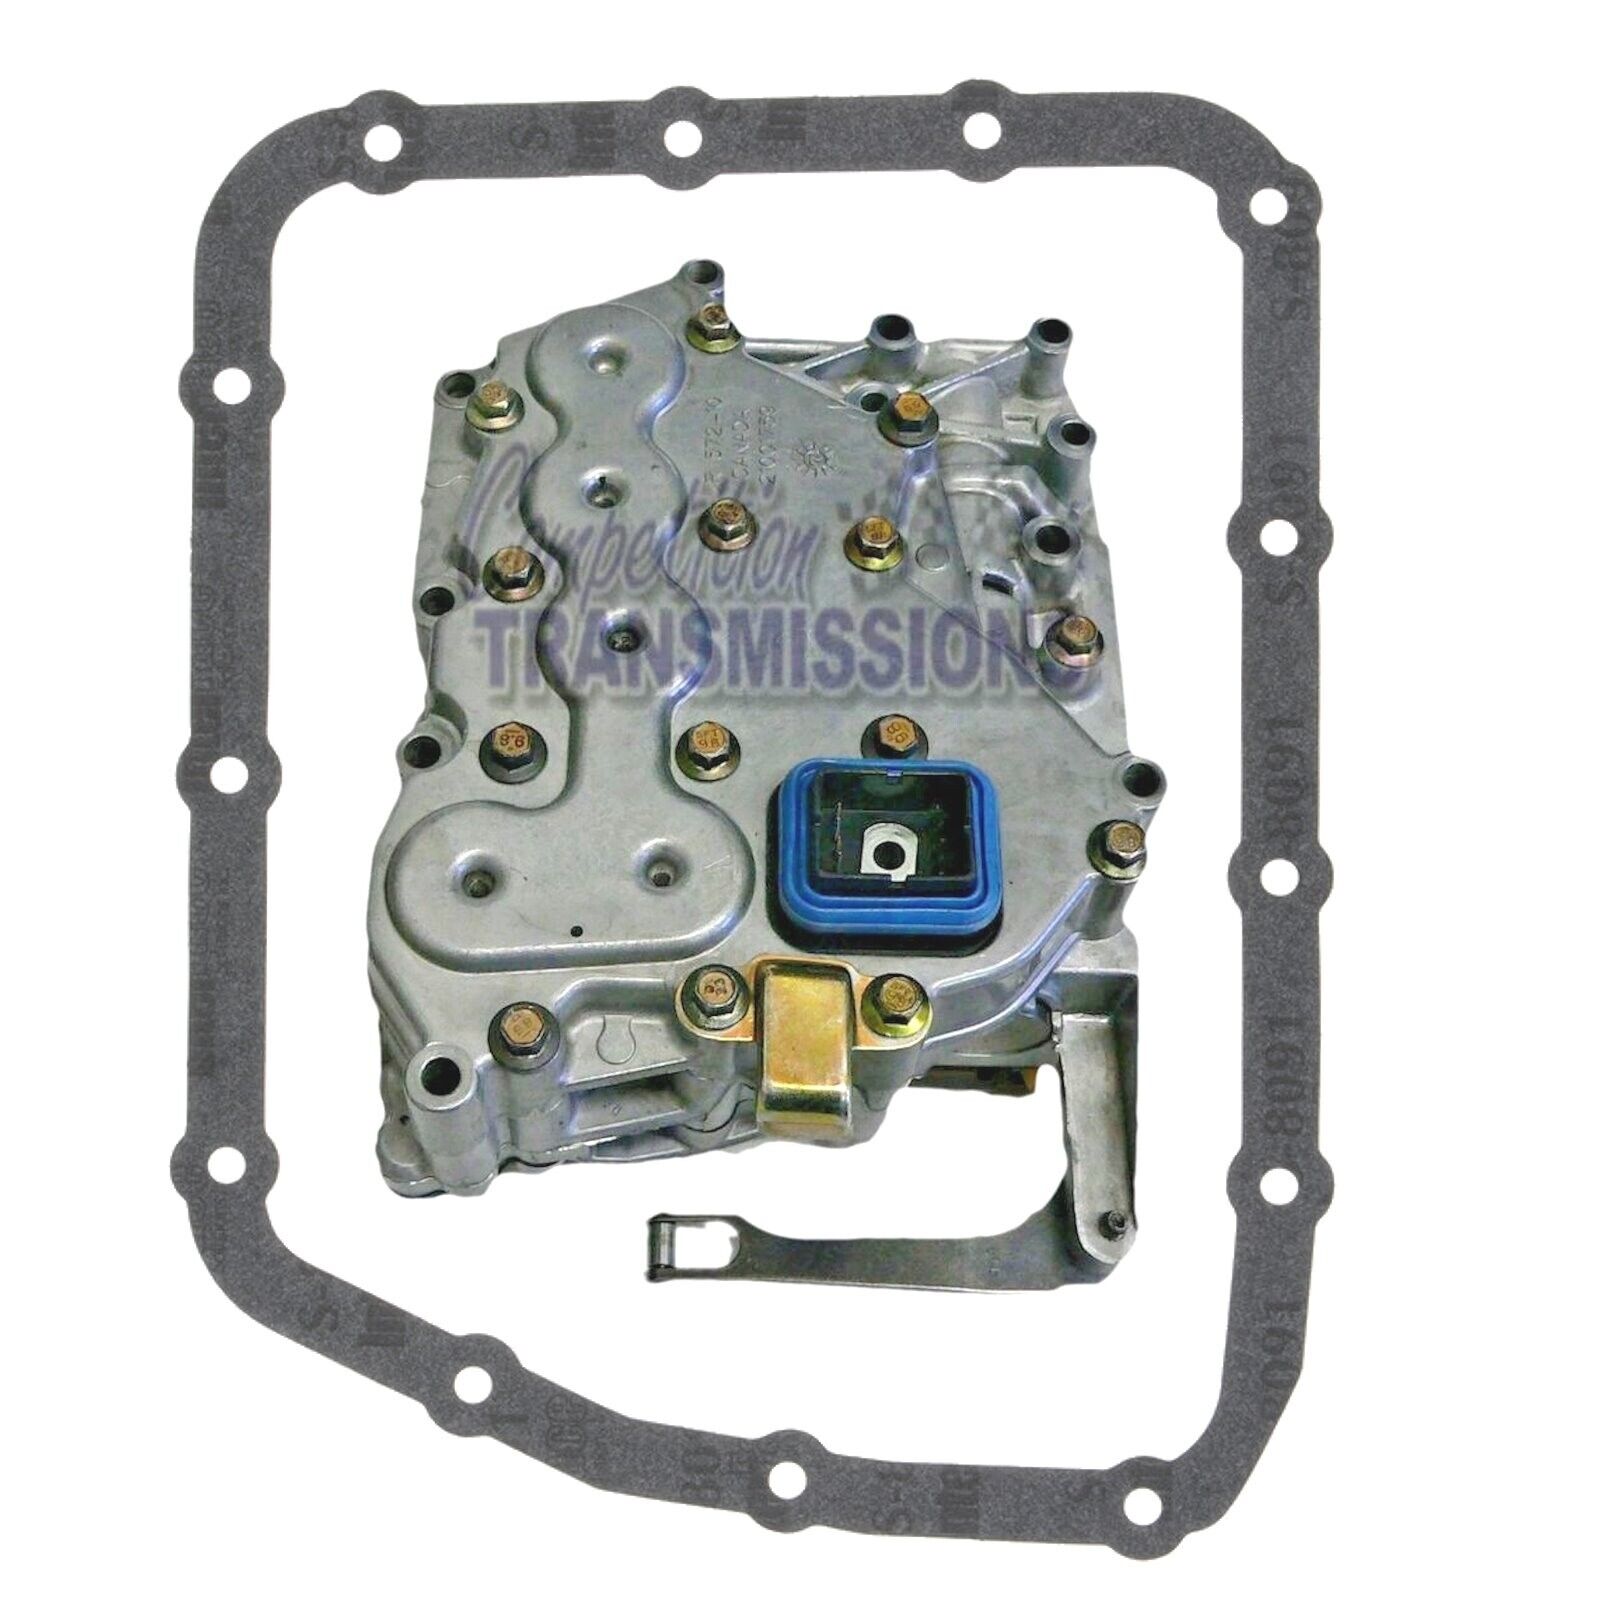 Saturn Valve Body for 93-02 SC SL SW TAAT Automatic Transmission includes Gasket